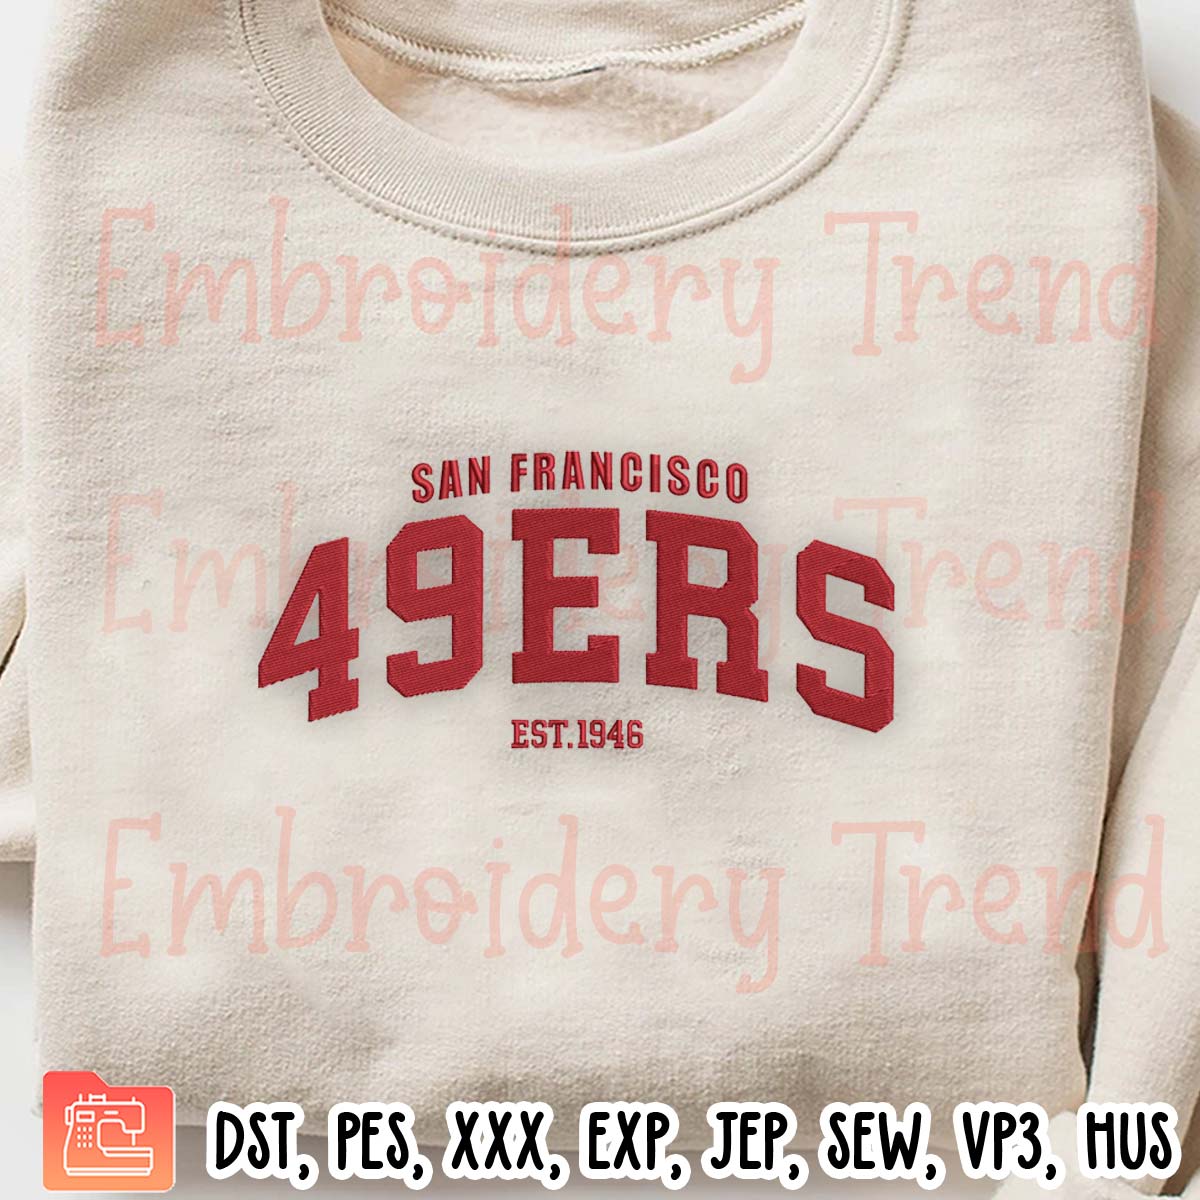 San Francisco 49ers Est 1946 Embroidery Design, NFL 49ers Football Embroidery Digitizing Pes File